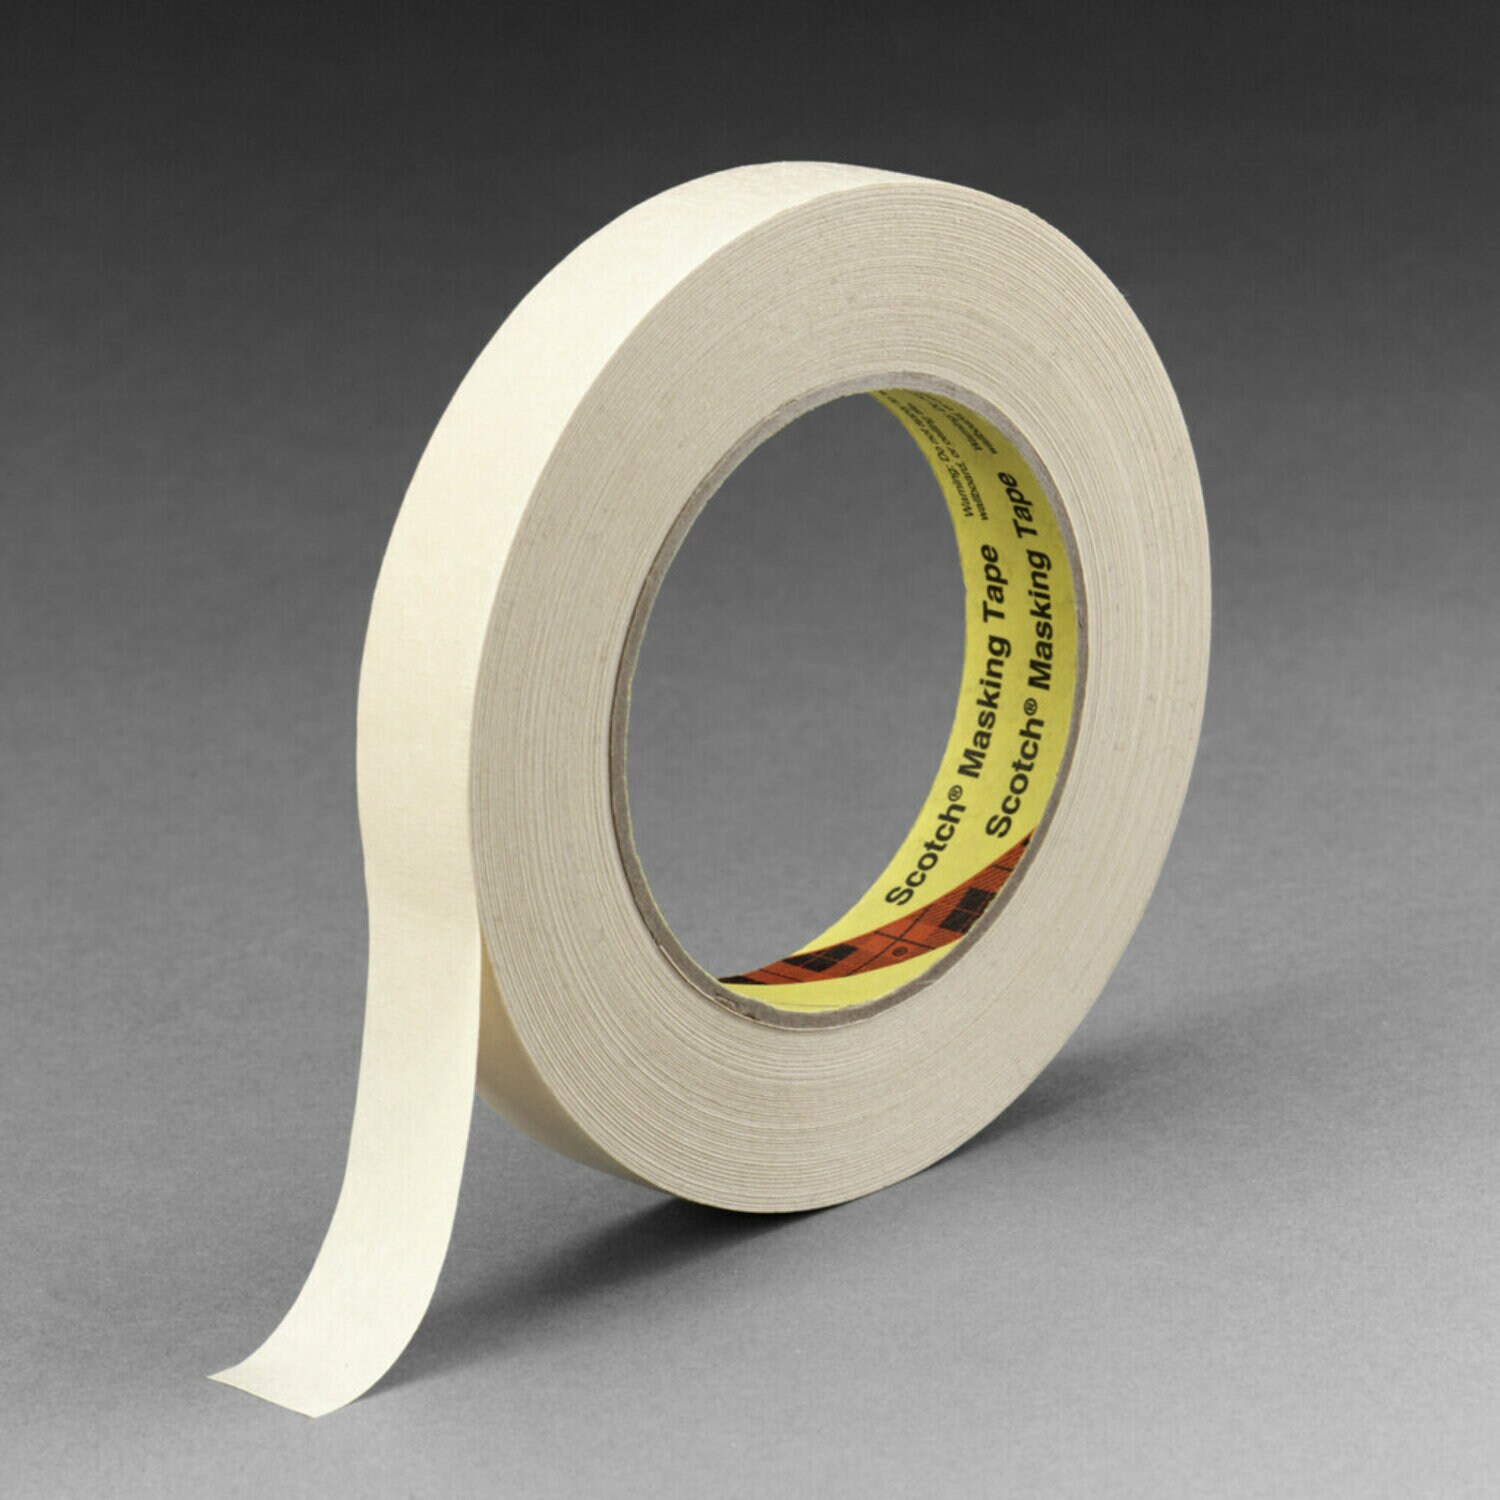 3M Double Coated Tape 444, Clear, 3/4 in x 36 yd, 3.9 Mil